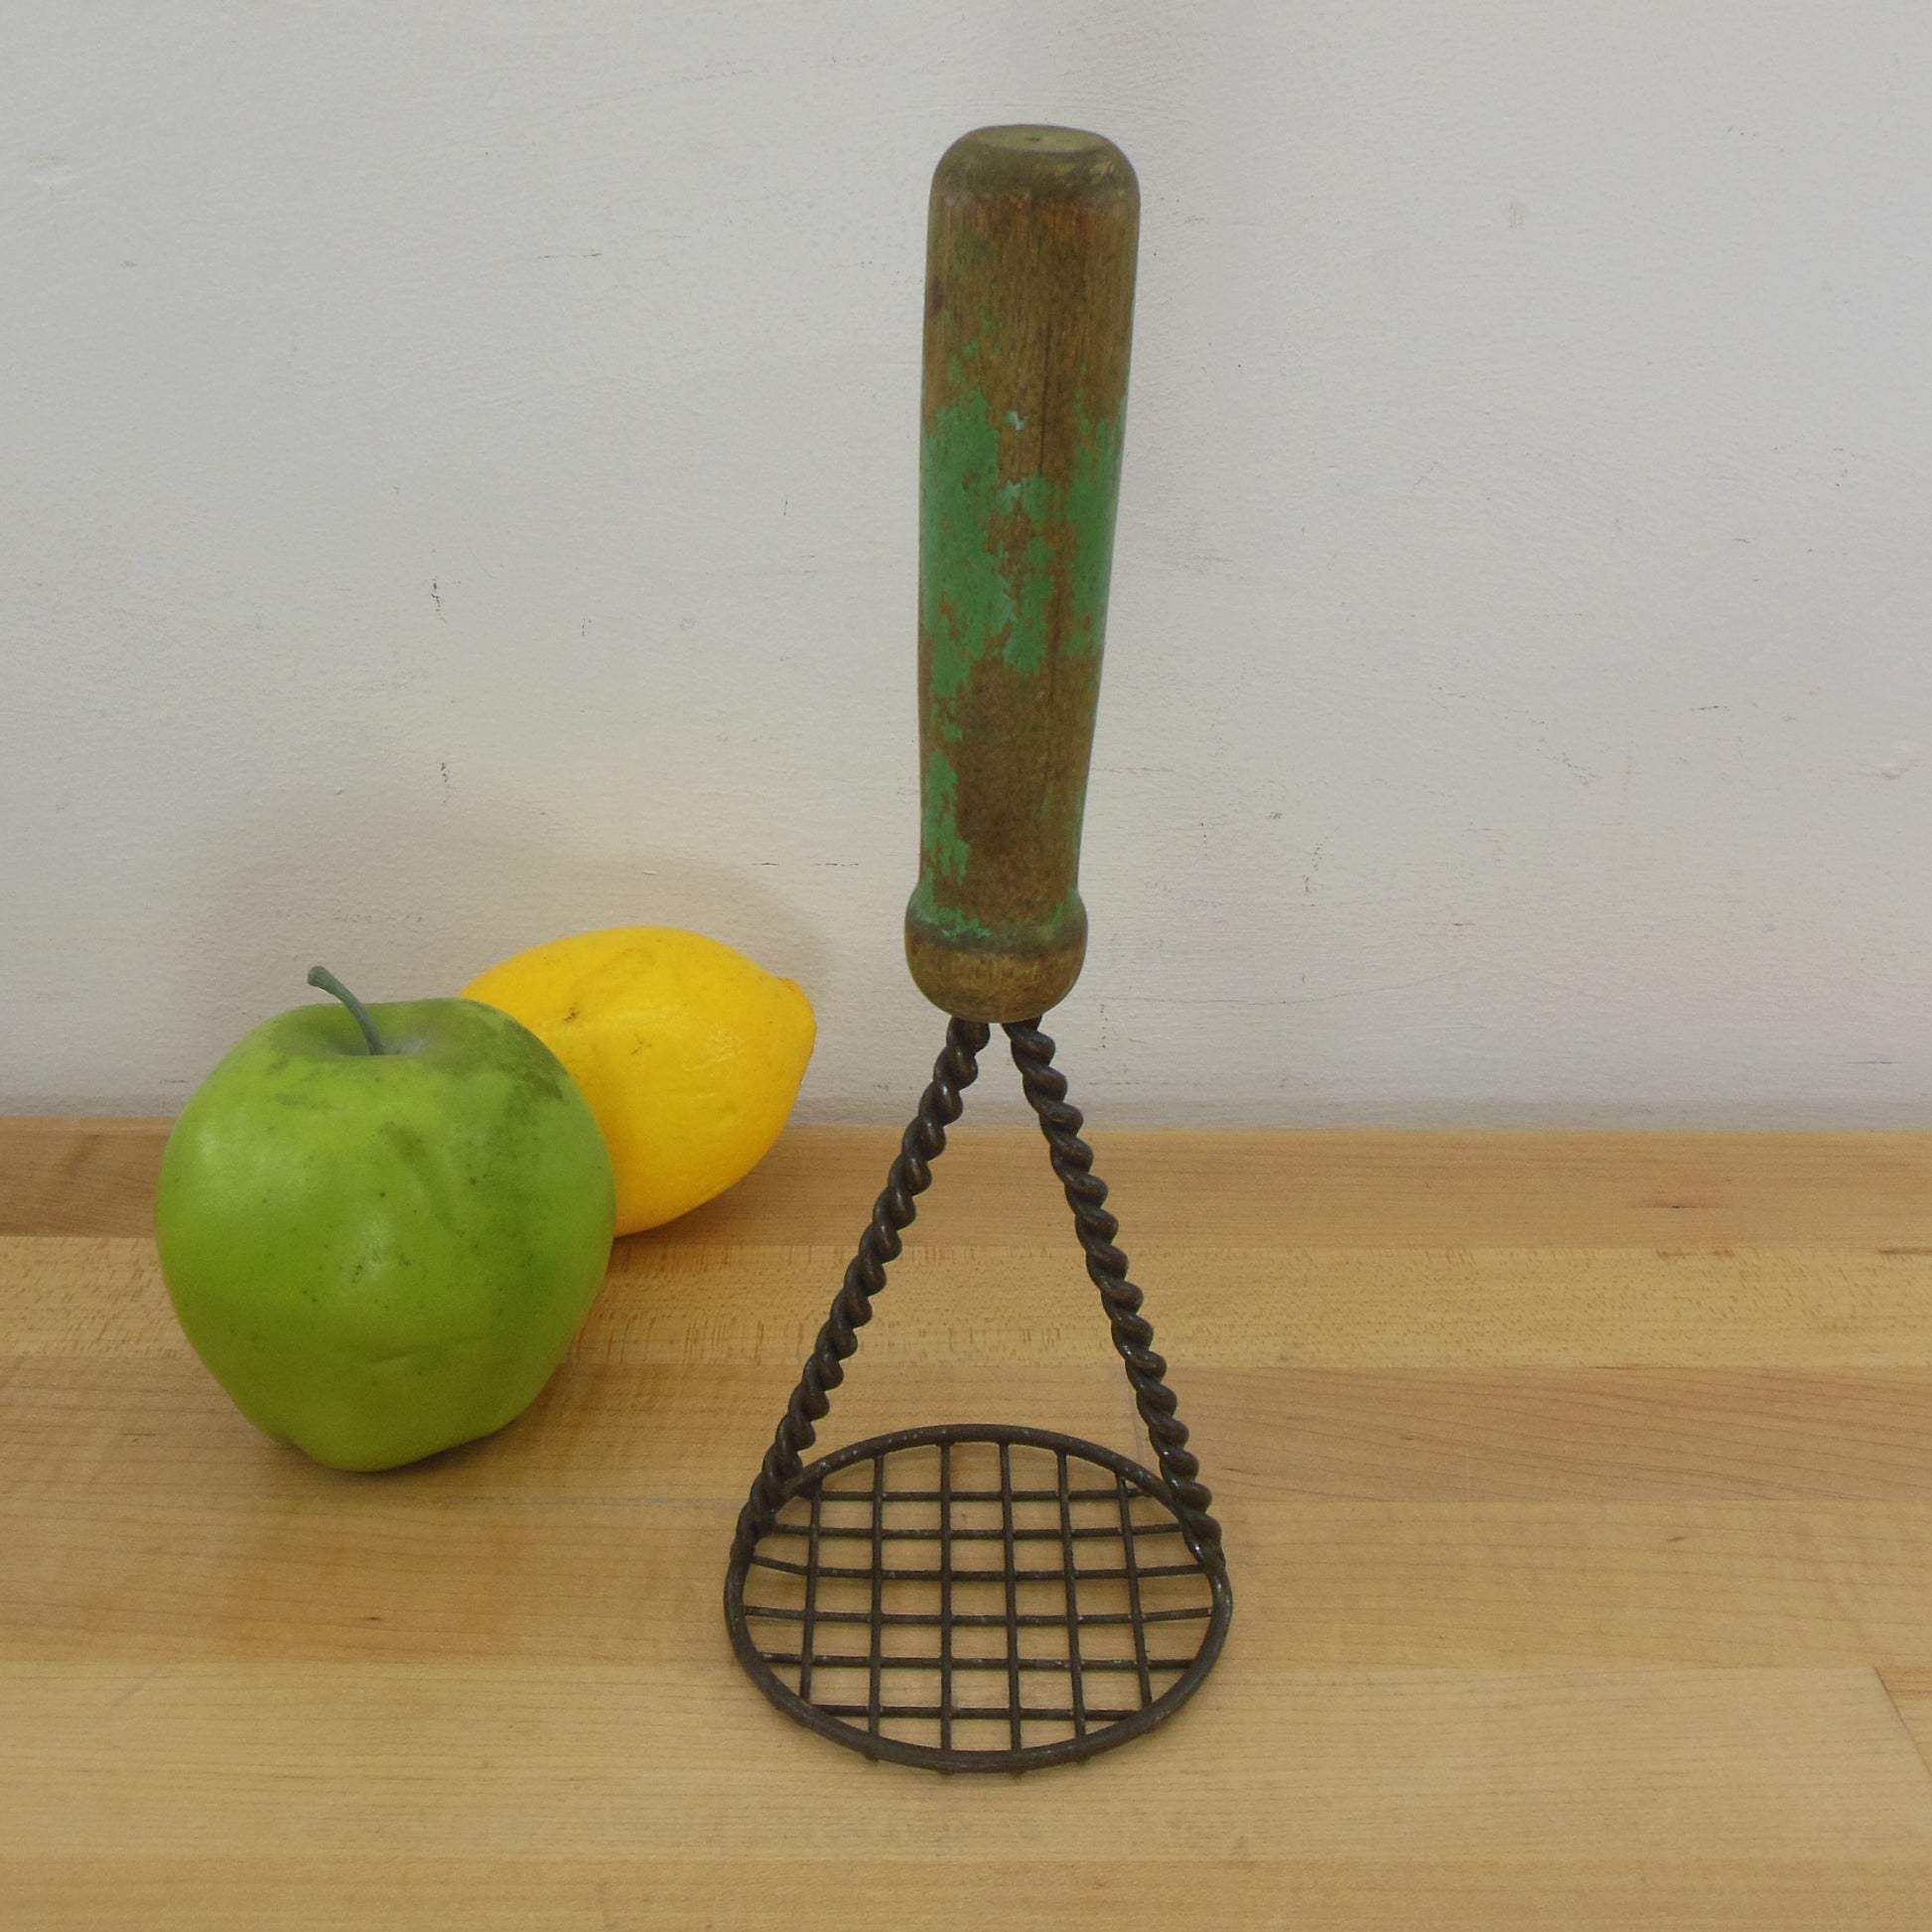 Vintage Potato Masher With Wood Handle Vintage Kitchen Tool Utensil Mid  Century Chippy Yellow and Gold Sparkles Rustic Food Masher 